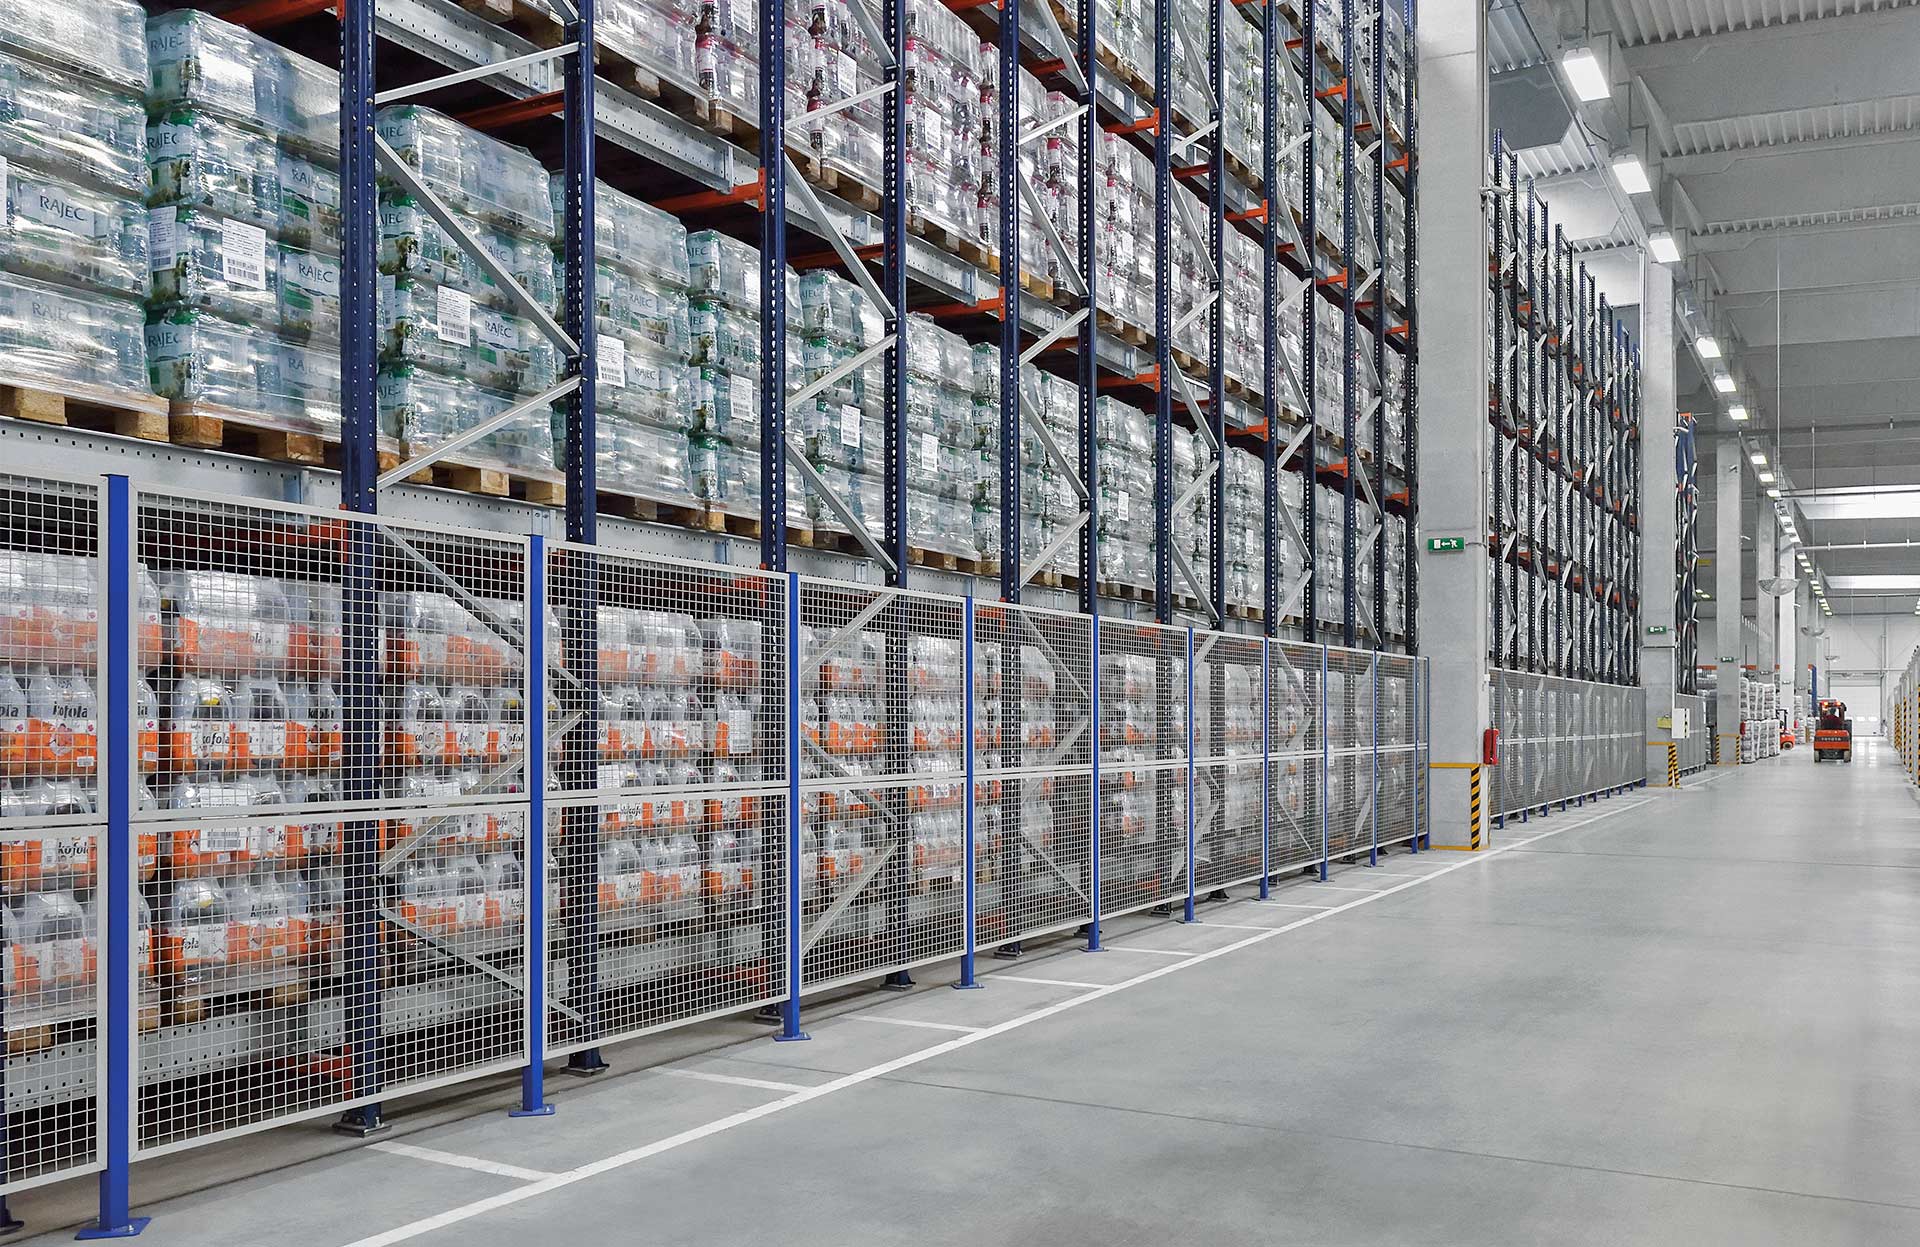 Perimeter safety enclosures are installed on the sides of the racking